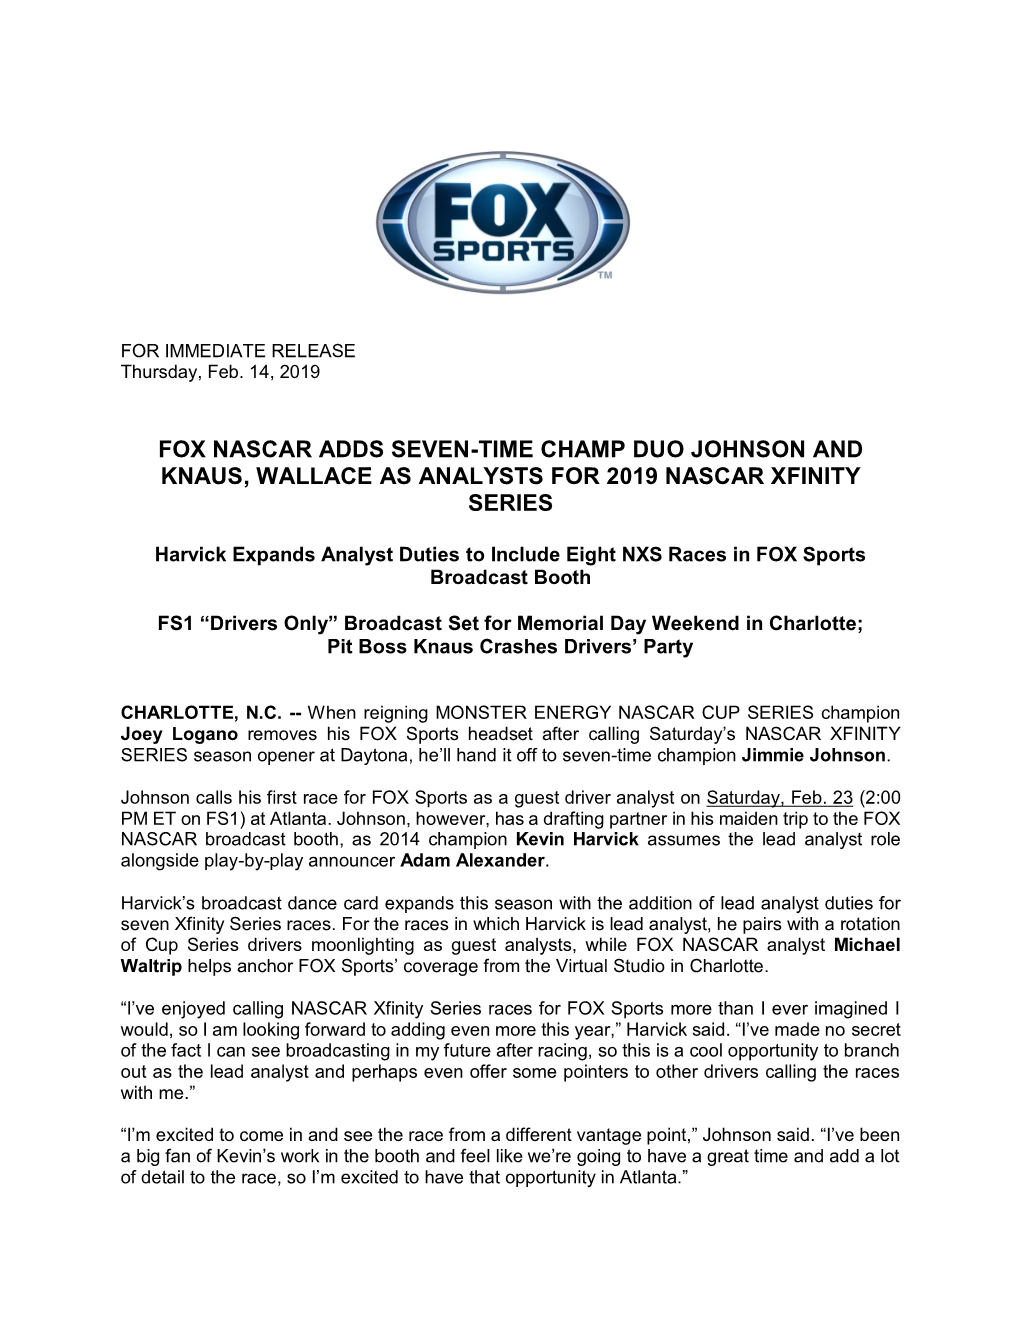 Fox Nascar Adds Seven-Time Champ Duo Johnson and Knaus, Wallace As Analysts for 2019 Nascar Xfinity Series